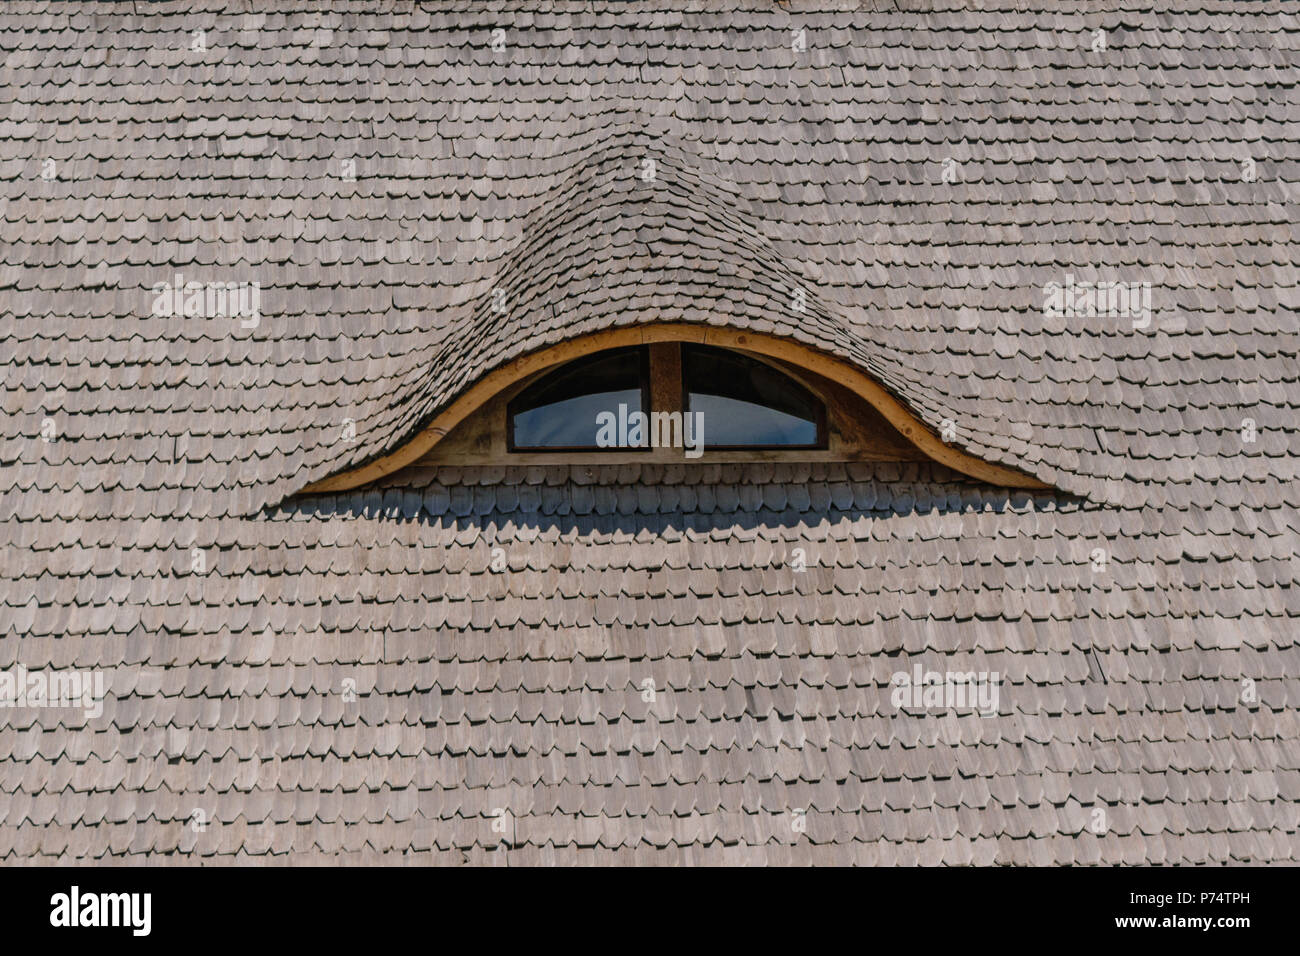 old traditional wood planks tiles roof with eye like window closeup Stock Photo